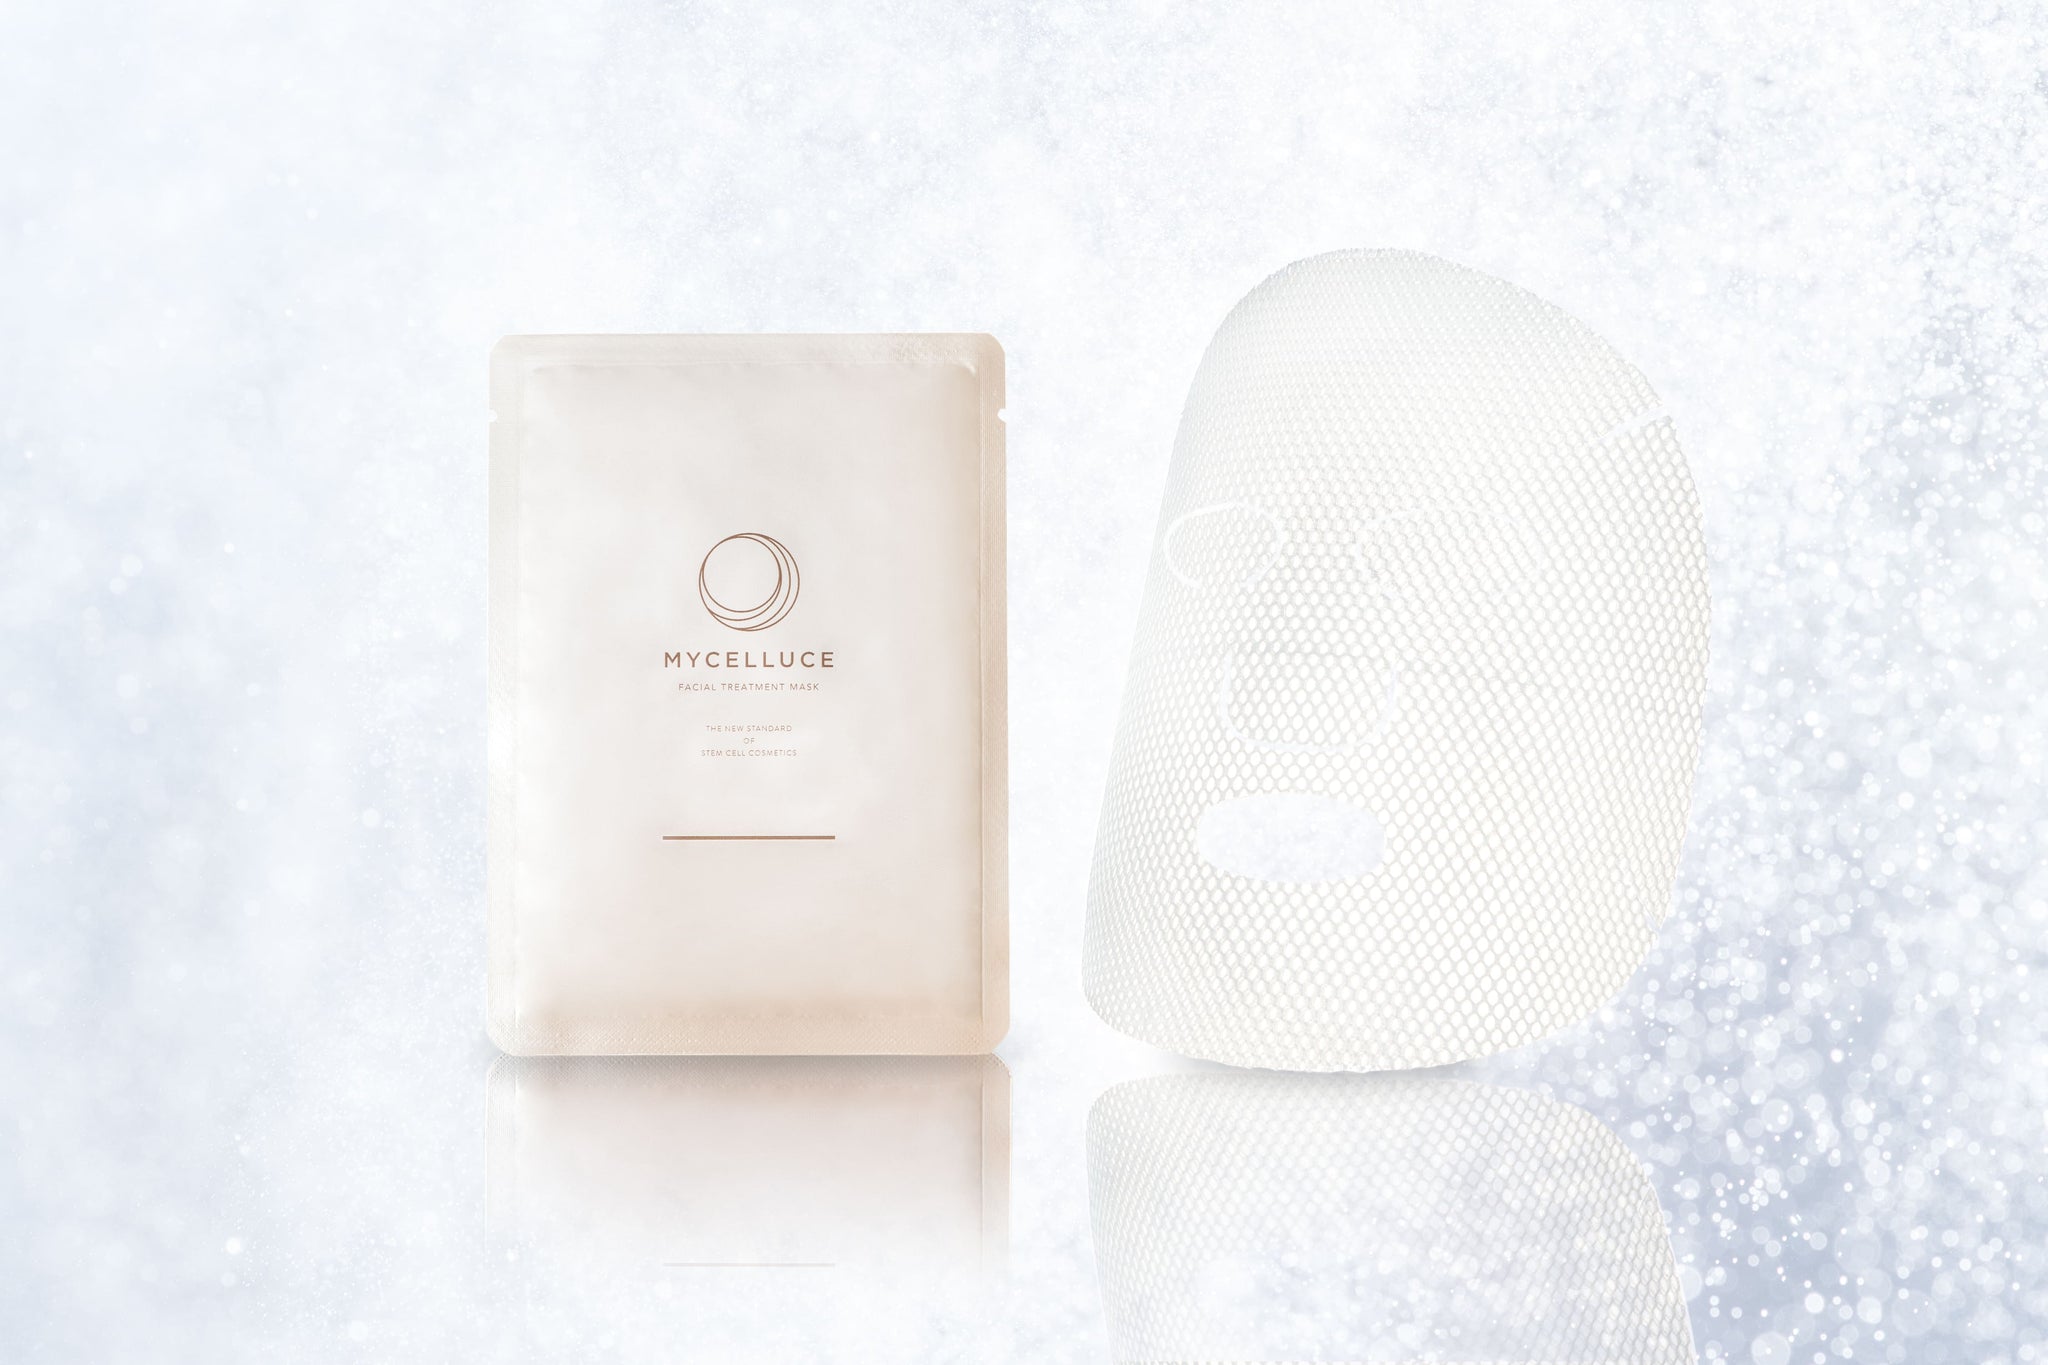 [MYCELLUCE] Facial Treatment Mask [Feel free course 30 days at the shortest] Exfoliating course Genderless stem cell conditioned culture solution-containing face mask (3 sheets)